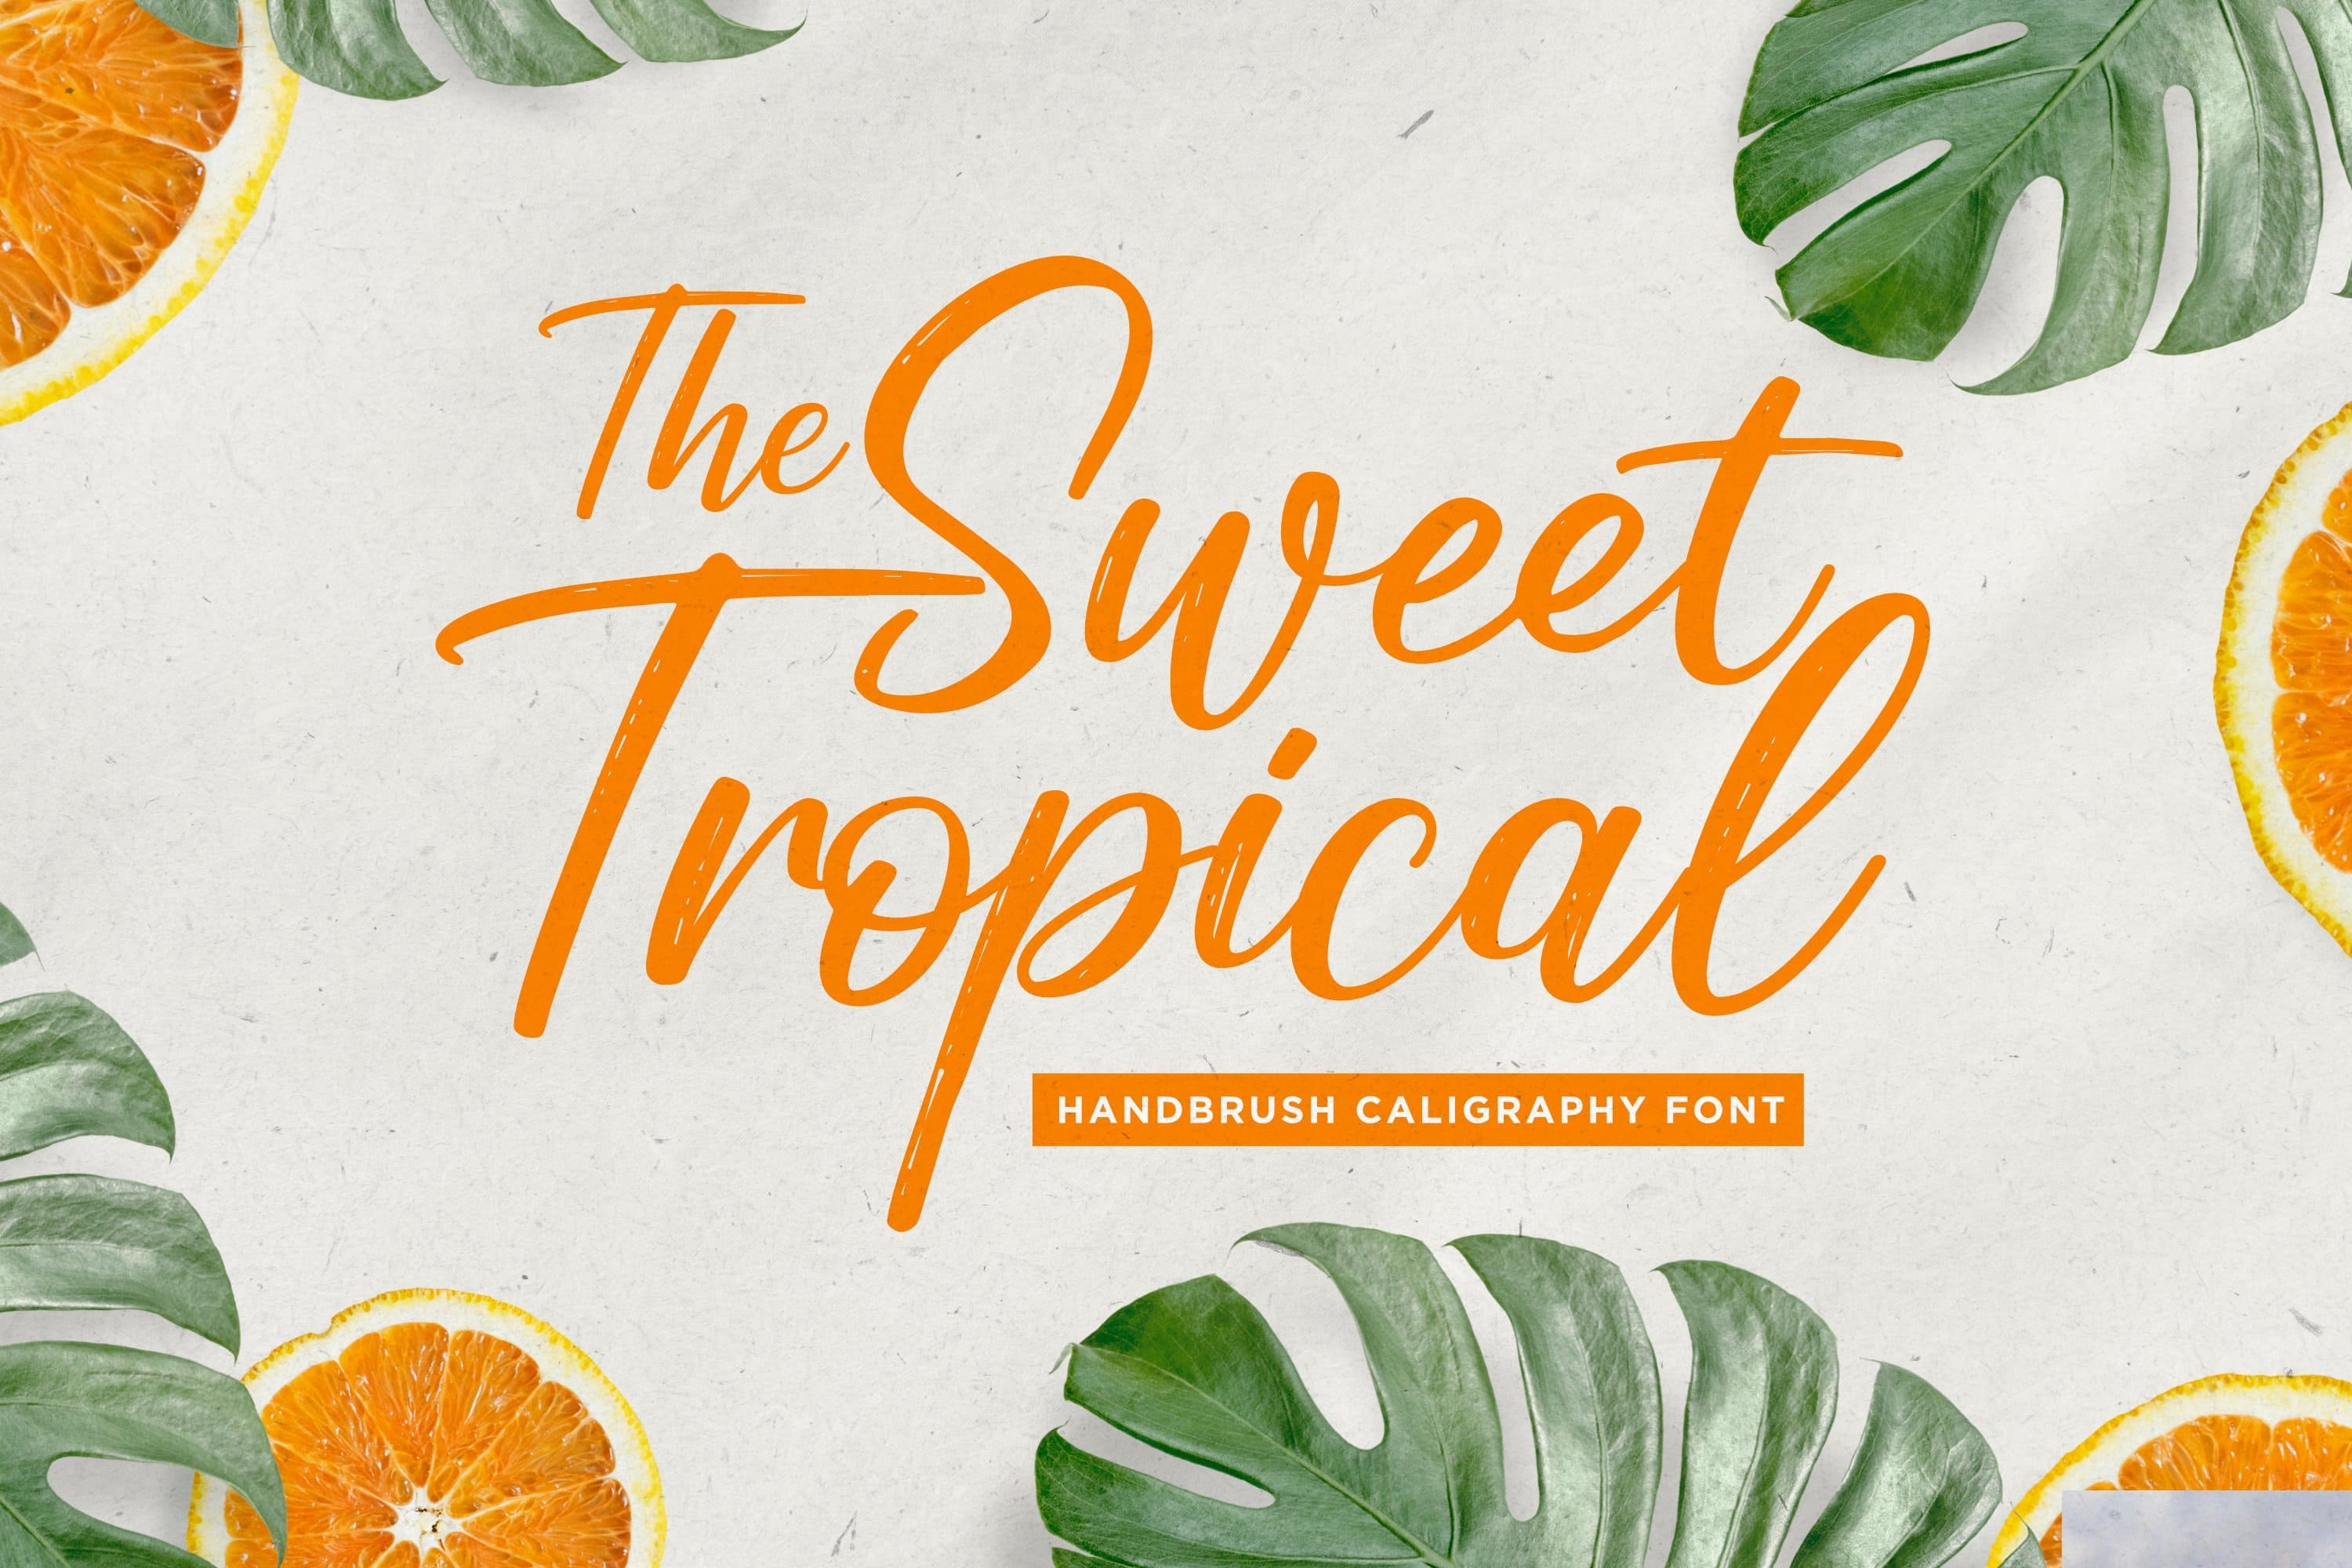 The Sweet Tropical - handbrush caligraphy font, main picture 3000x2000.